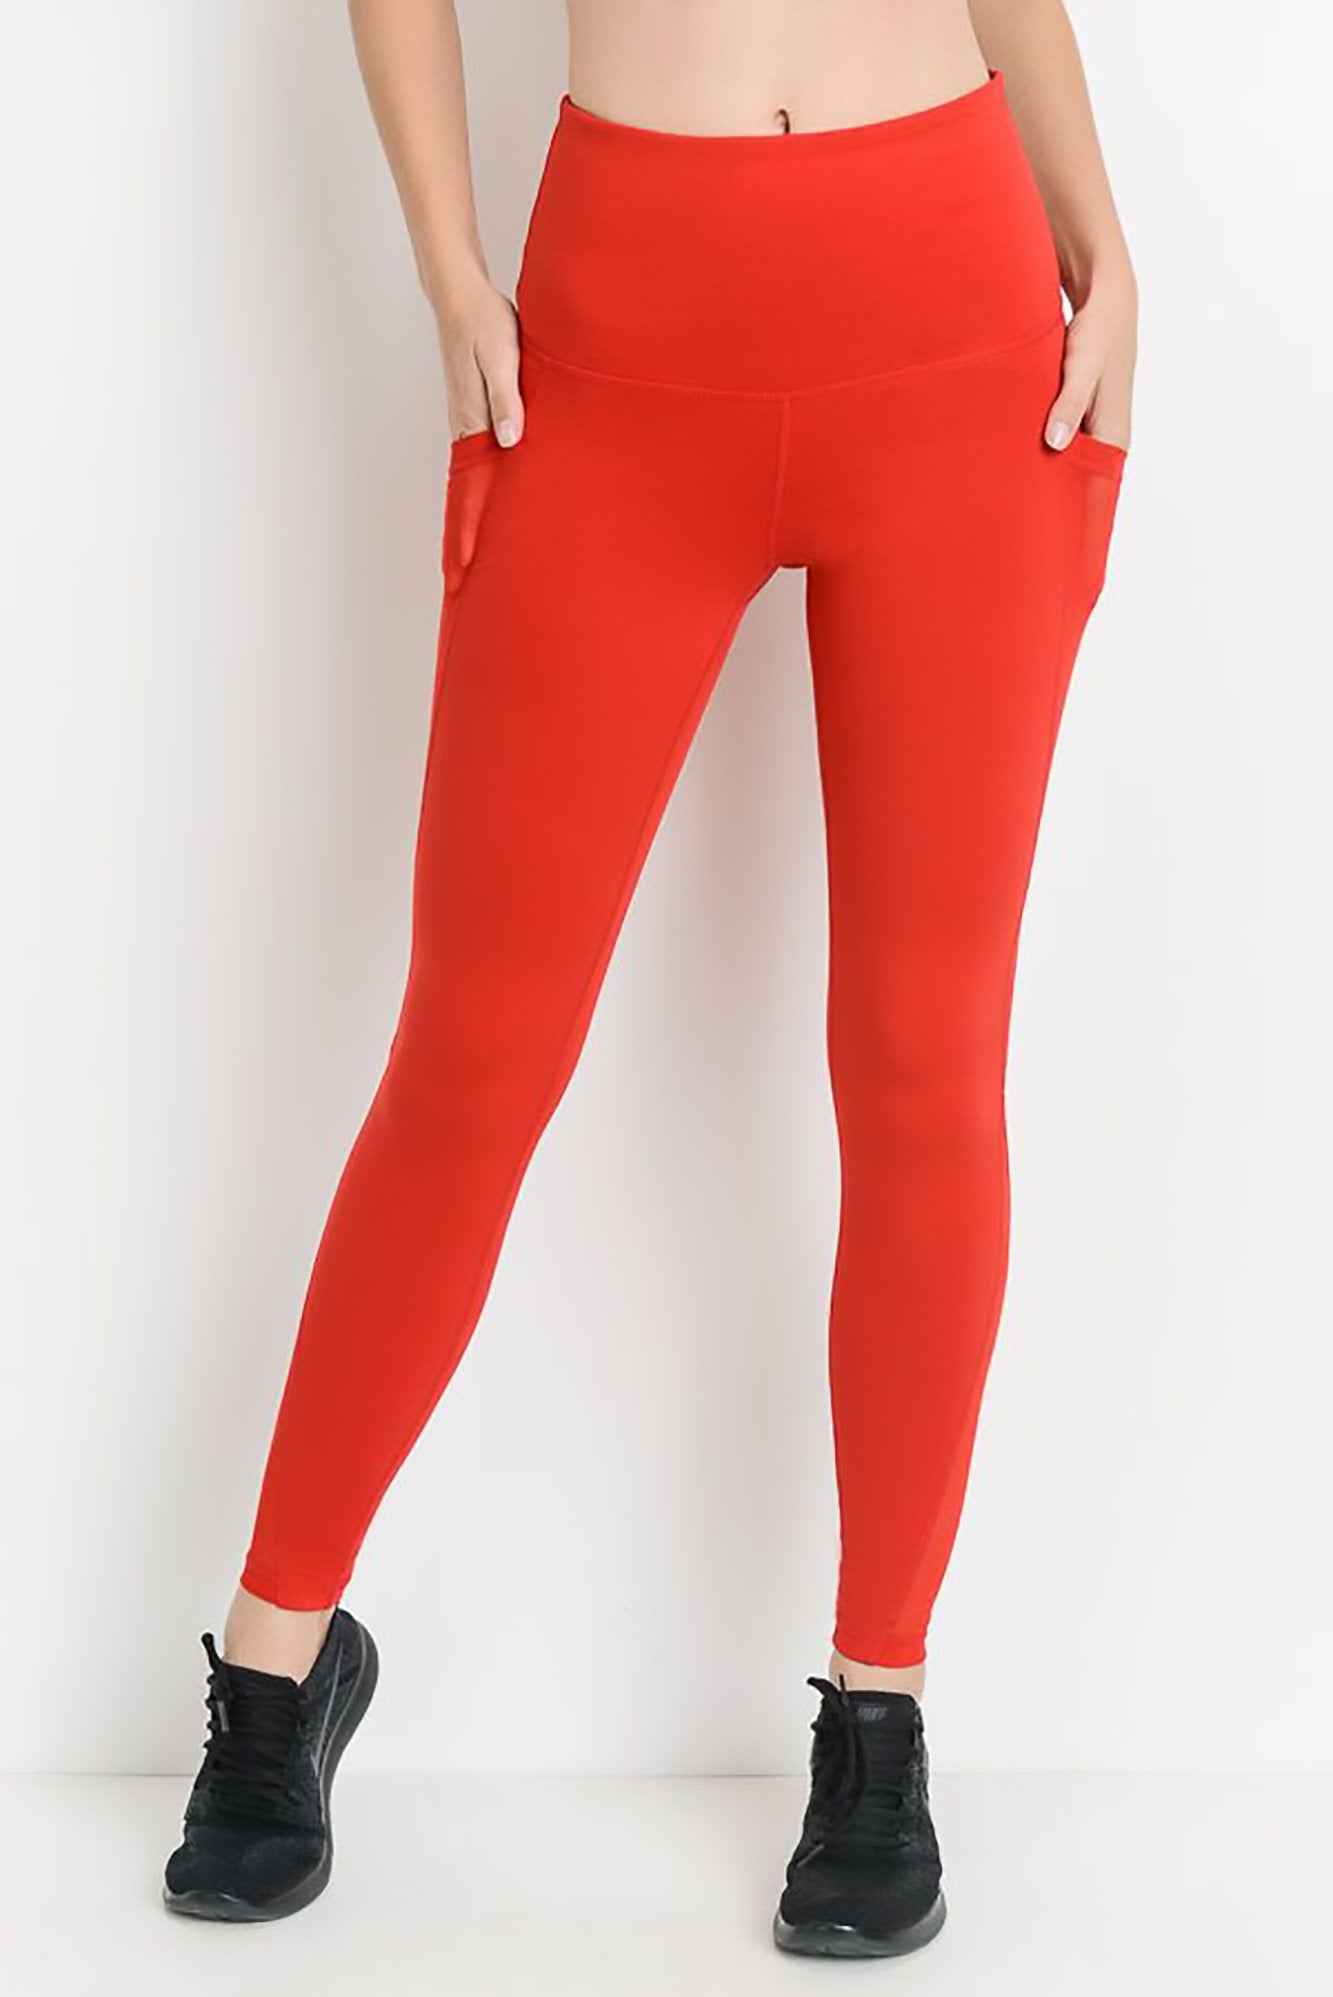 Forever 21 Women's Active Seamless High-Rise Leggings in Fiery Red Small -  ShopStyle